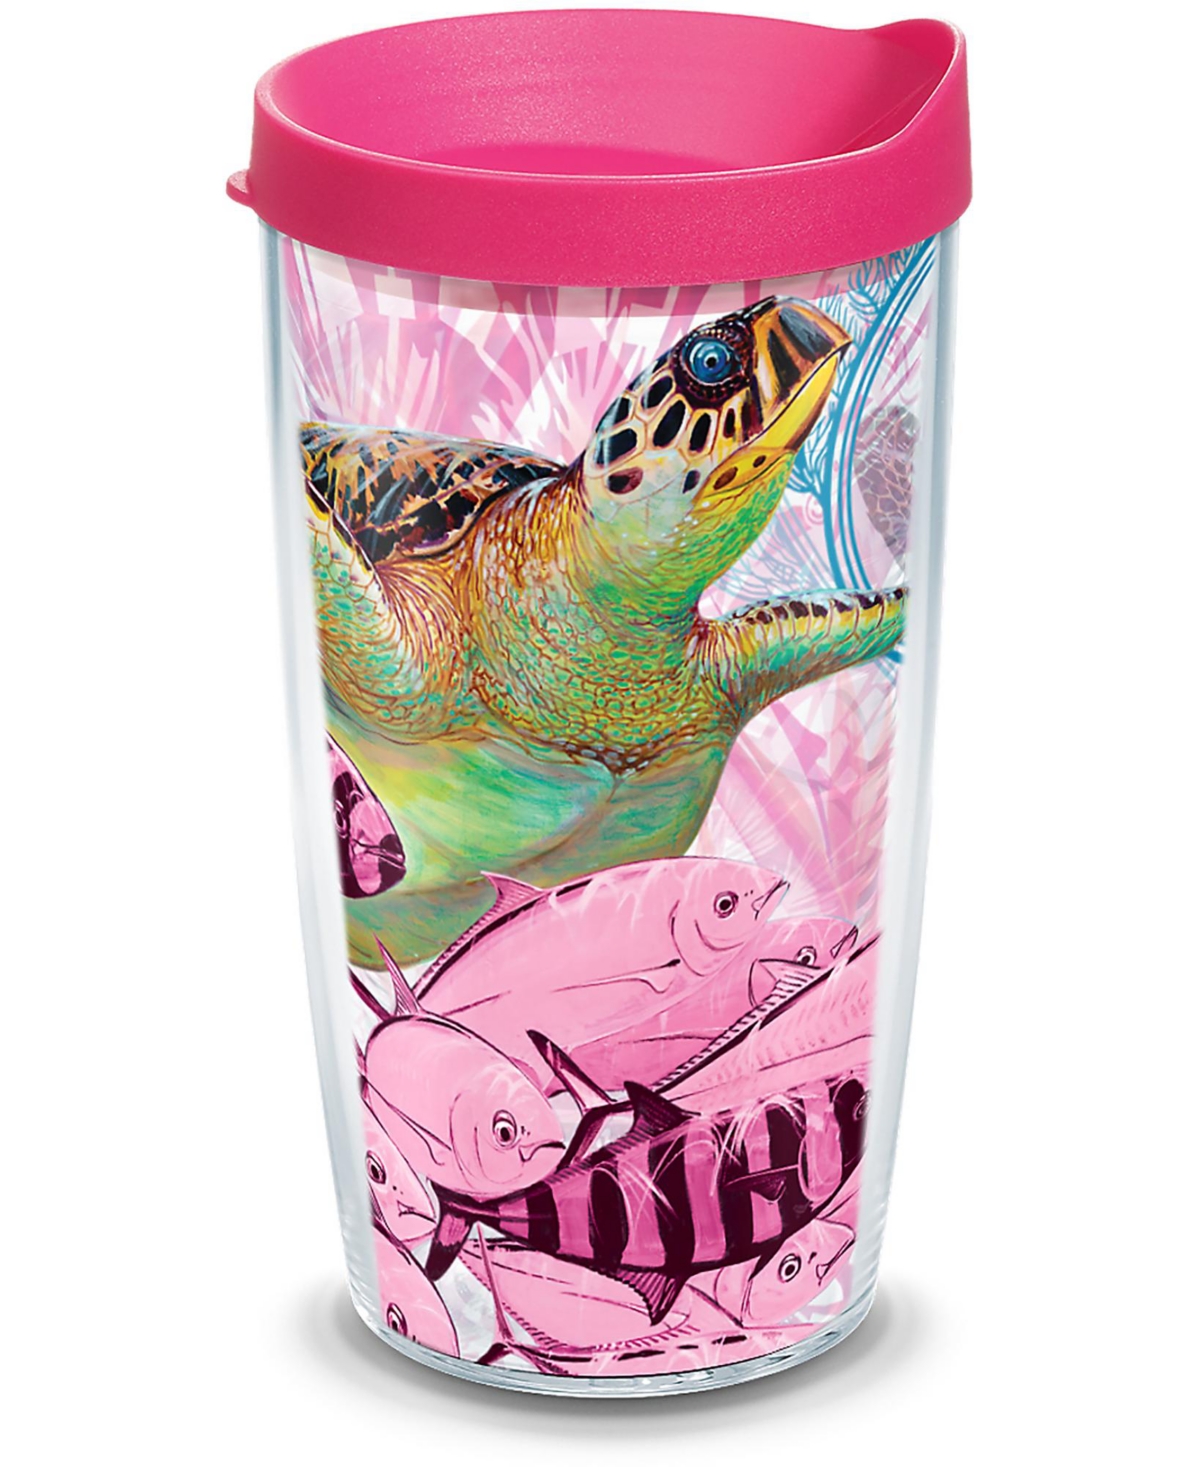 Tervis Tumbler Tervis Guy Harvey Made In Usa Double Walled Insulated Tumbler Travel Cup Keeps Drinks Cold & Hot, 16 In Open Miscellaneous